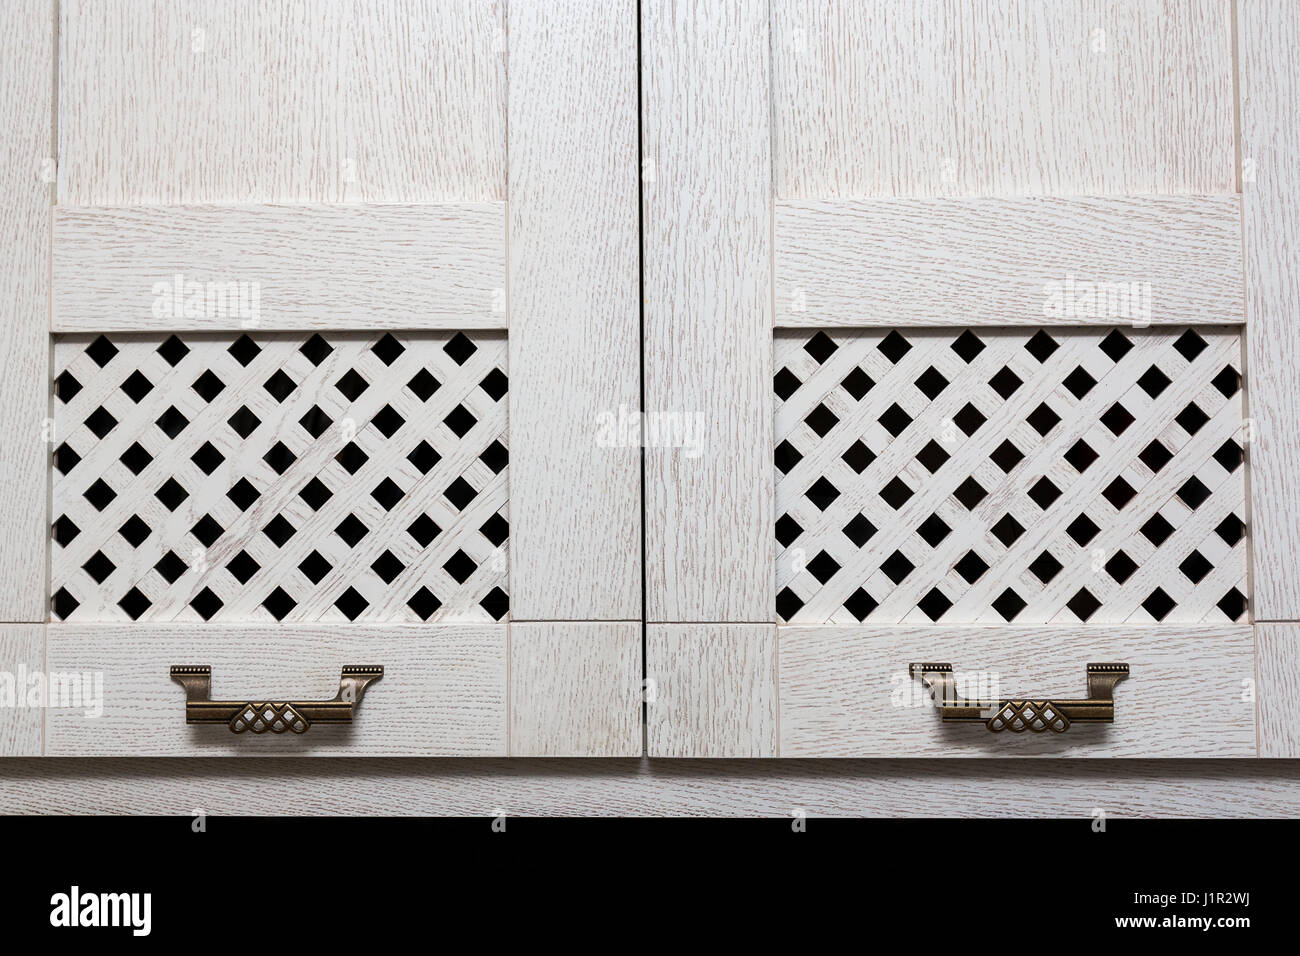 cabinet doors with wooden bars and metal handles in style Stock Photo